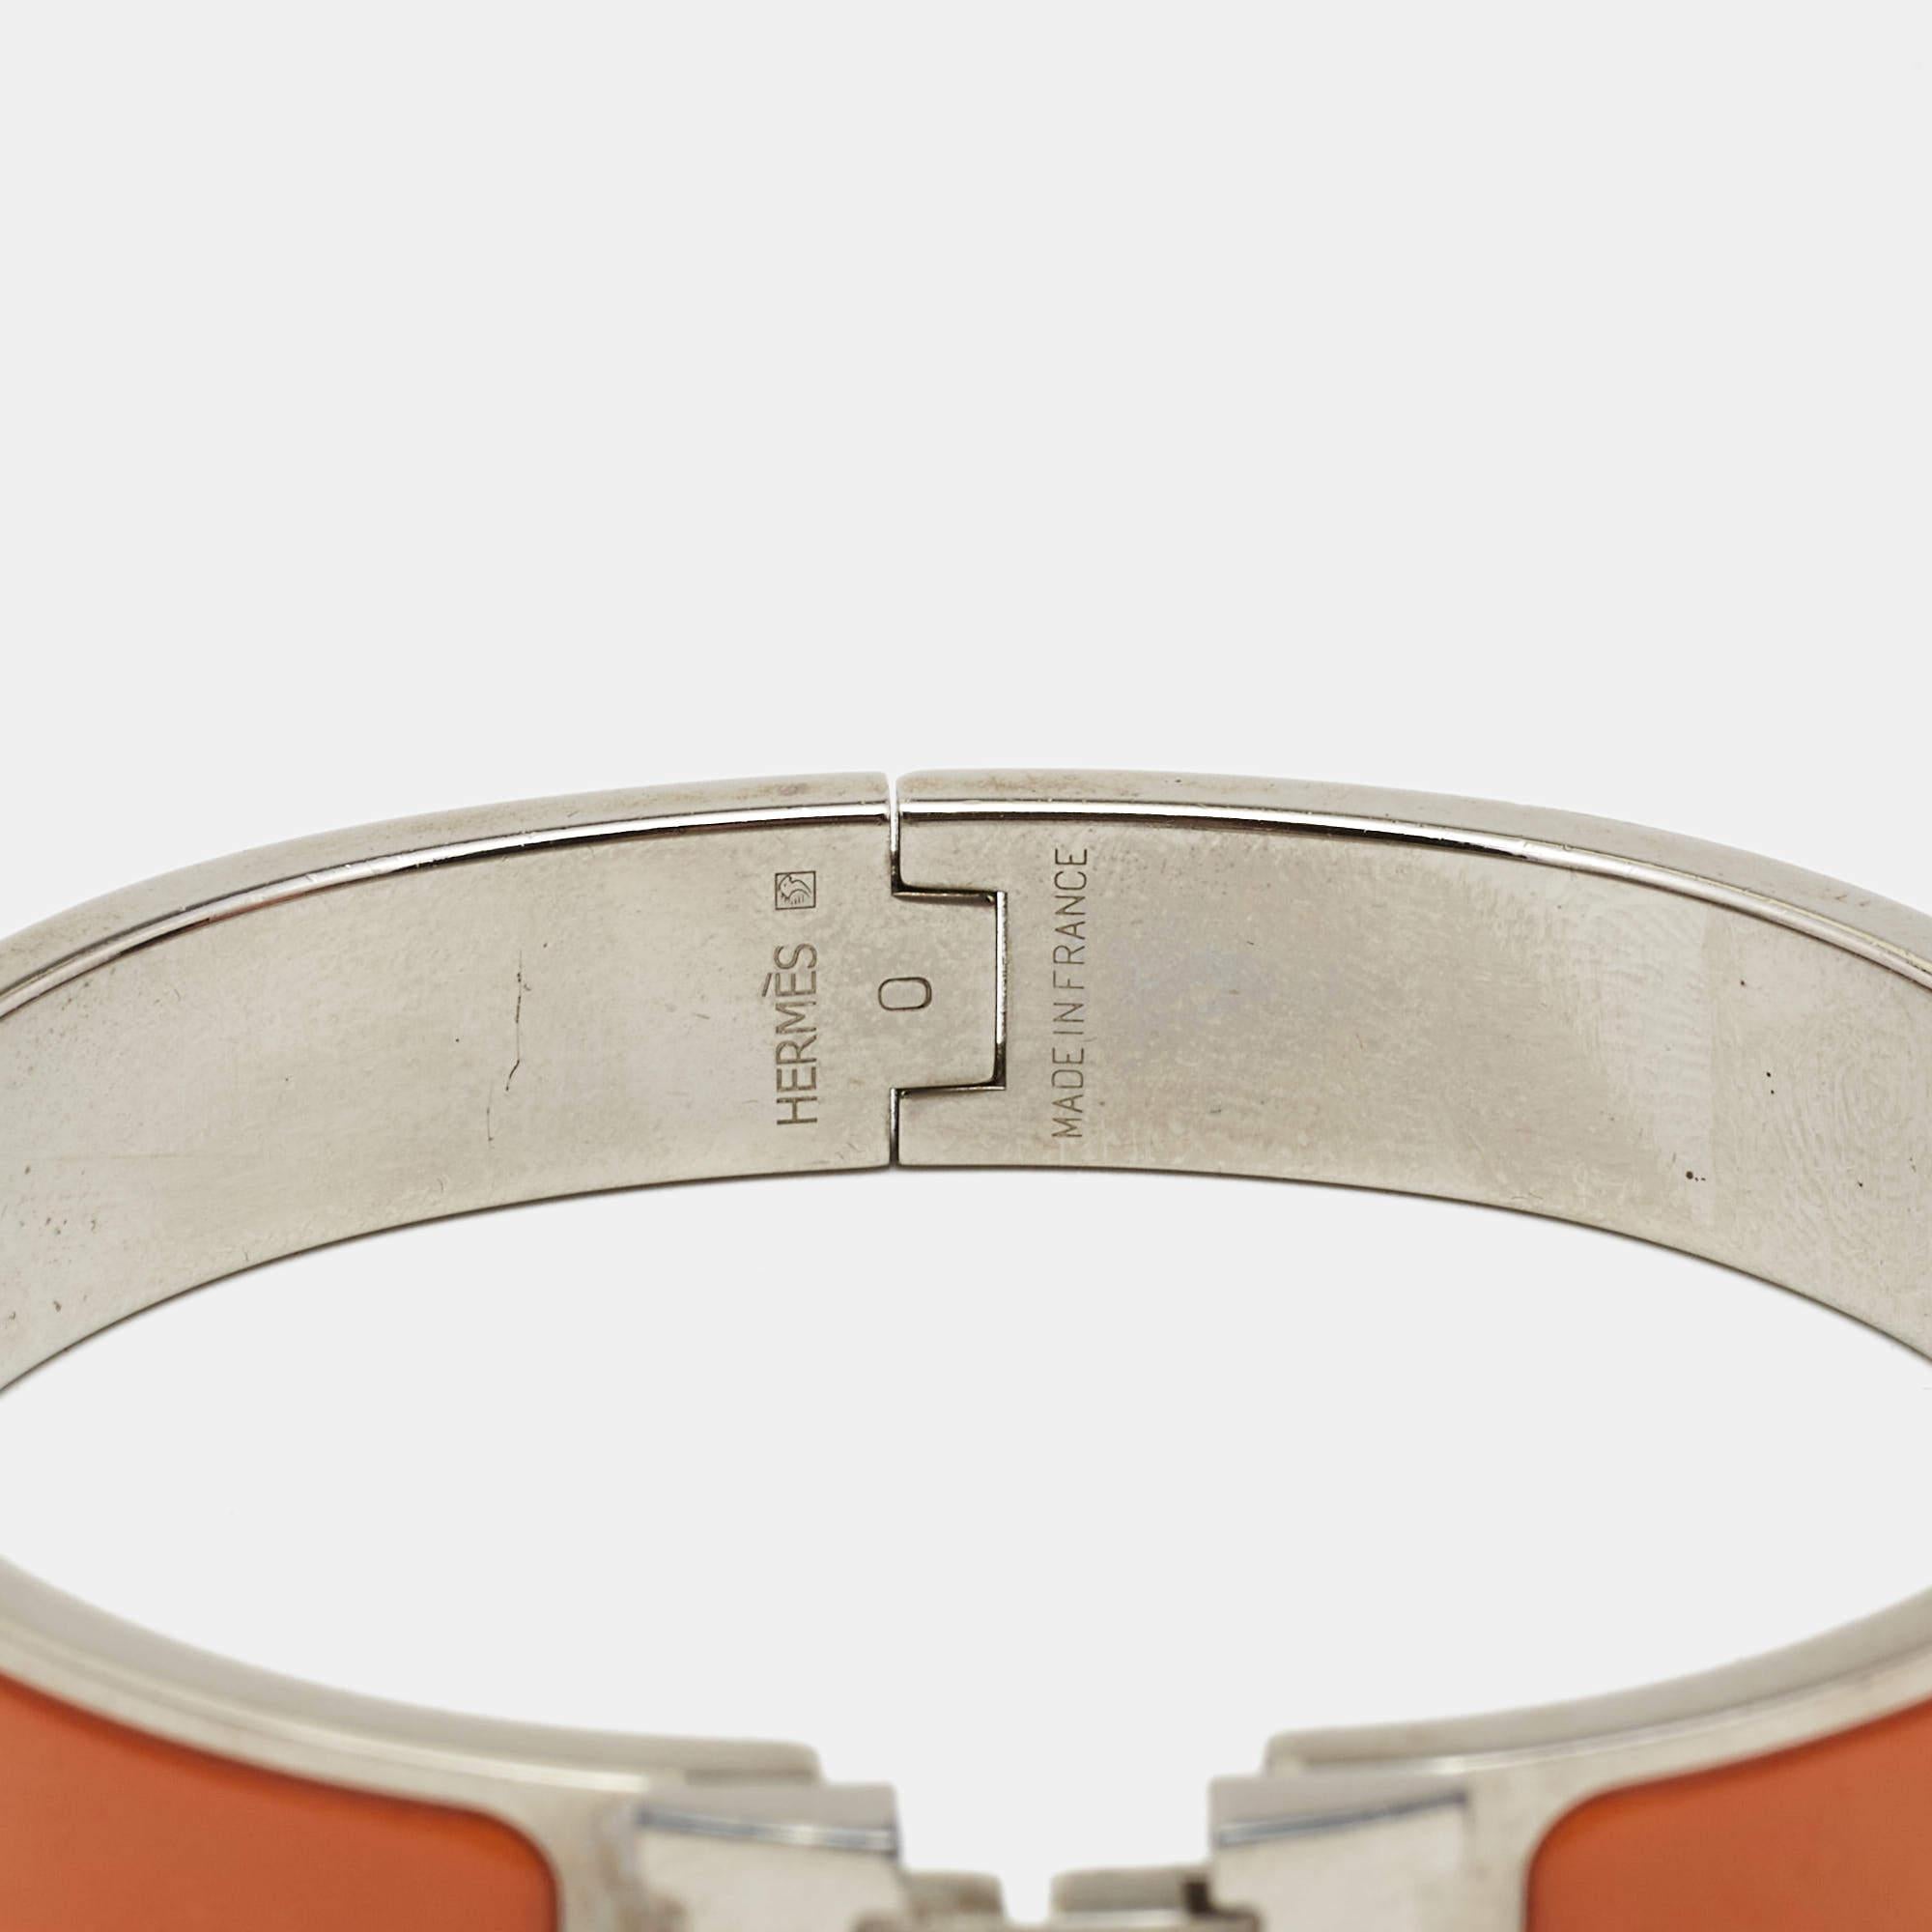 This bracelet embodies Hermès’ elegant craftsmanship with its palladium-plated body and an enamel inlay. Featuring the iconic H logo of the fashion house at the front, this bracelet is the accessory to buy today!

Includes

Original Box, Original